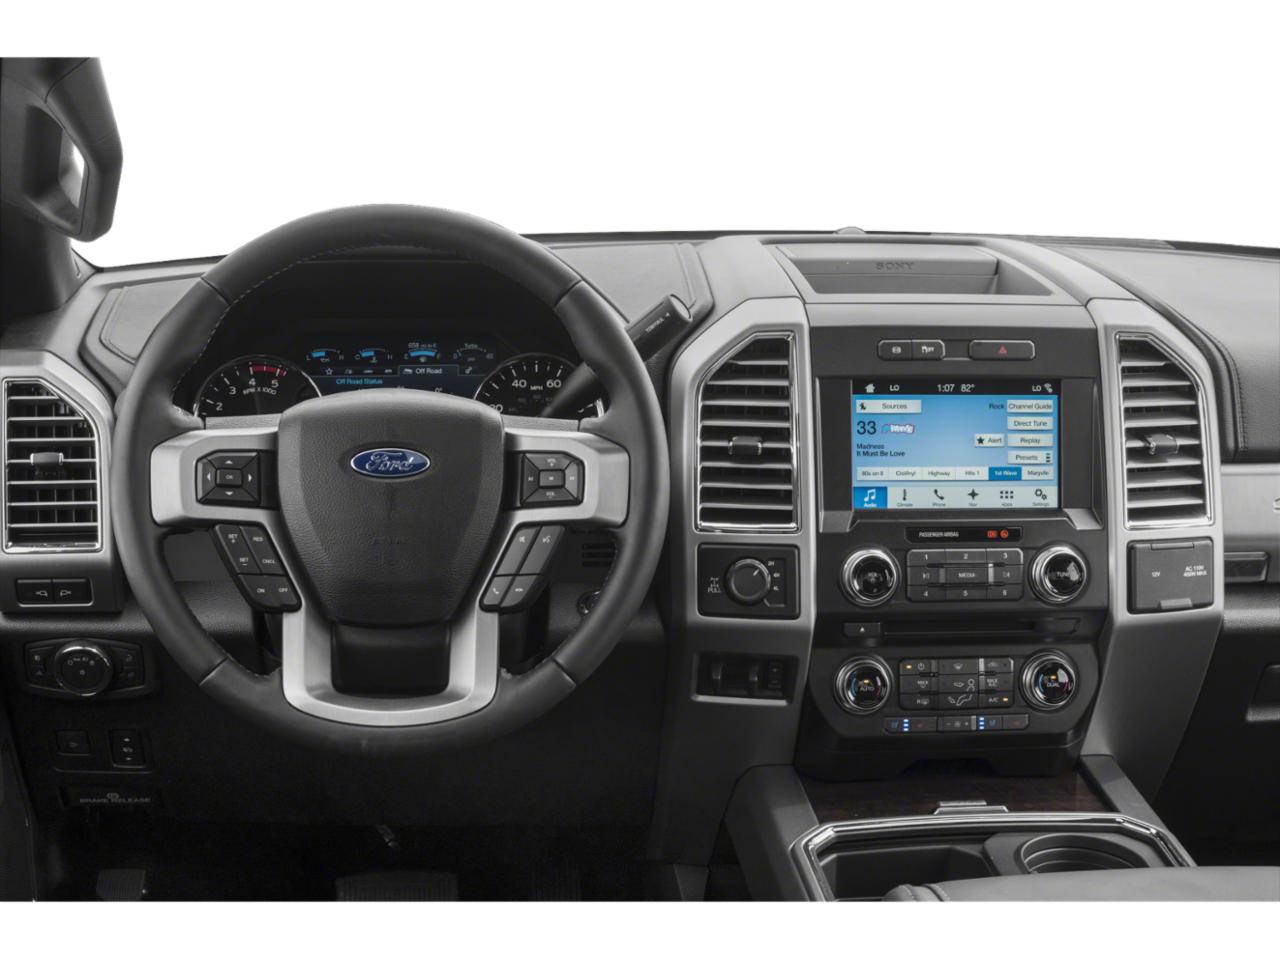 2019 Ford Super Duty F-250 SRW Vehicle Photo in Ft. Myers, FL 33907